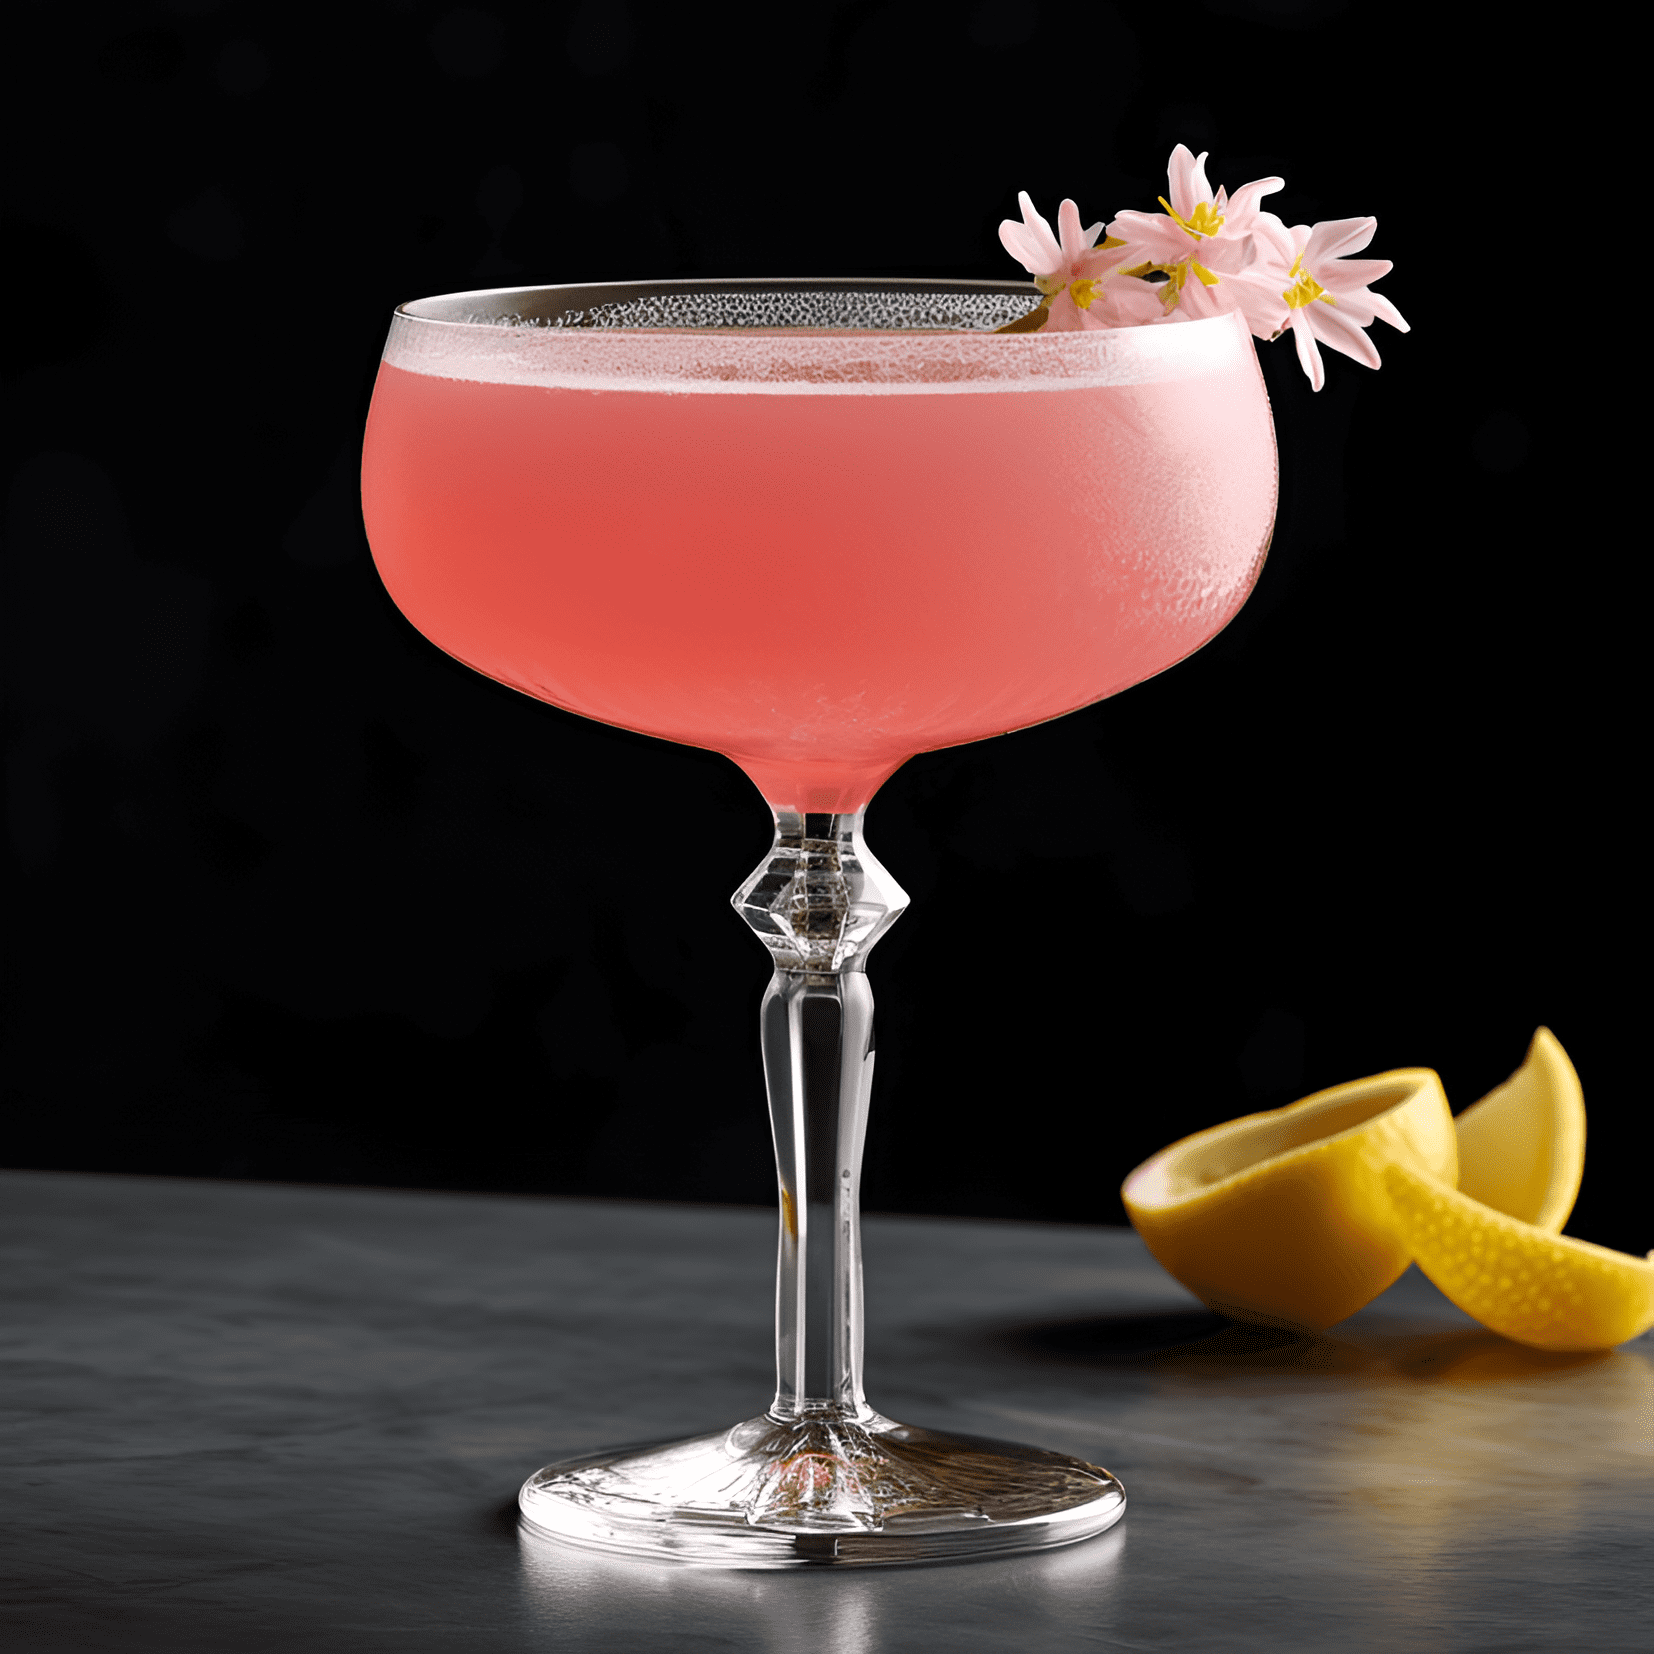 Jasmine Cocktail Recipe - The Jasmine cocktail has a delightful balance of sweet, sour, and bitter flavors. The citrus notes from the lemon juice and Cointreau provide a refreshing tang, while the Campari adds a touch of bitterness. The gin serves as a strong, yet smooth backbone for the drink.